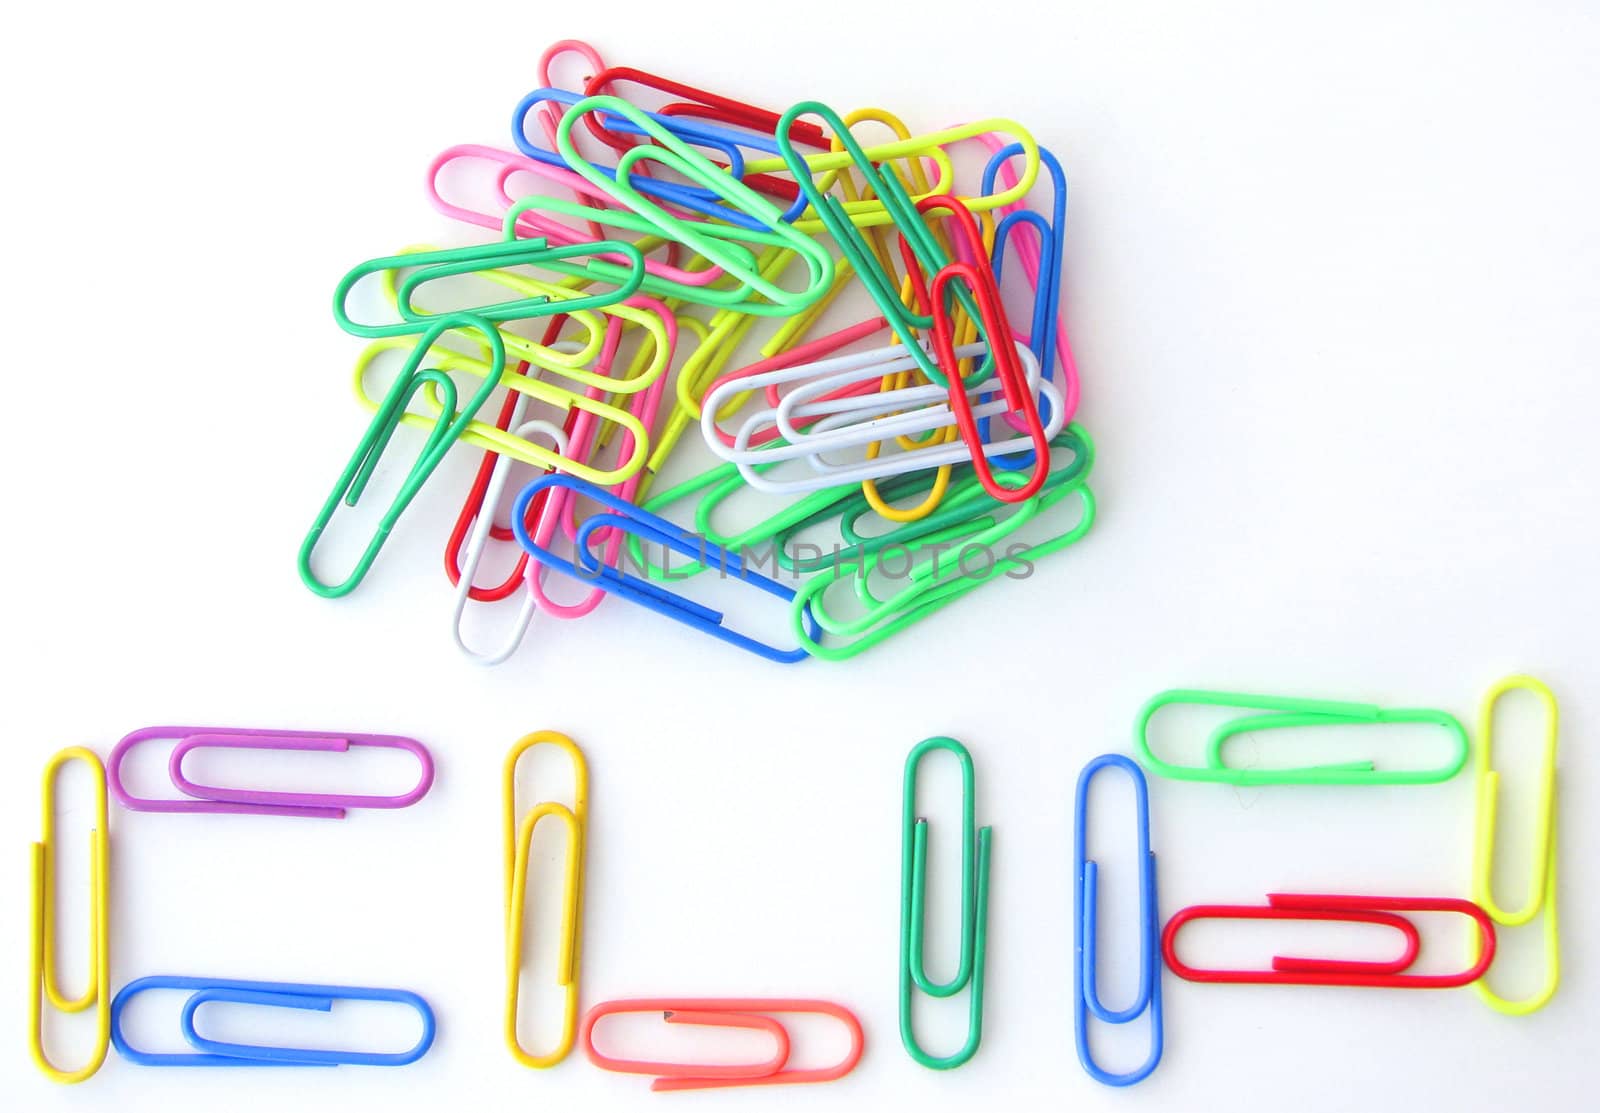 Spelling "CLIP" with paper clips on white background.
